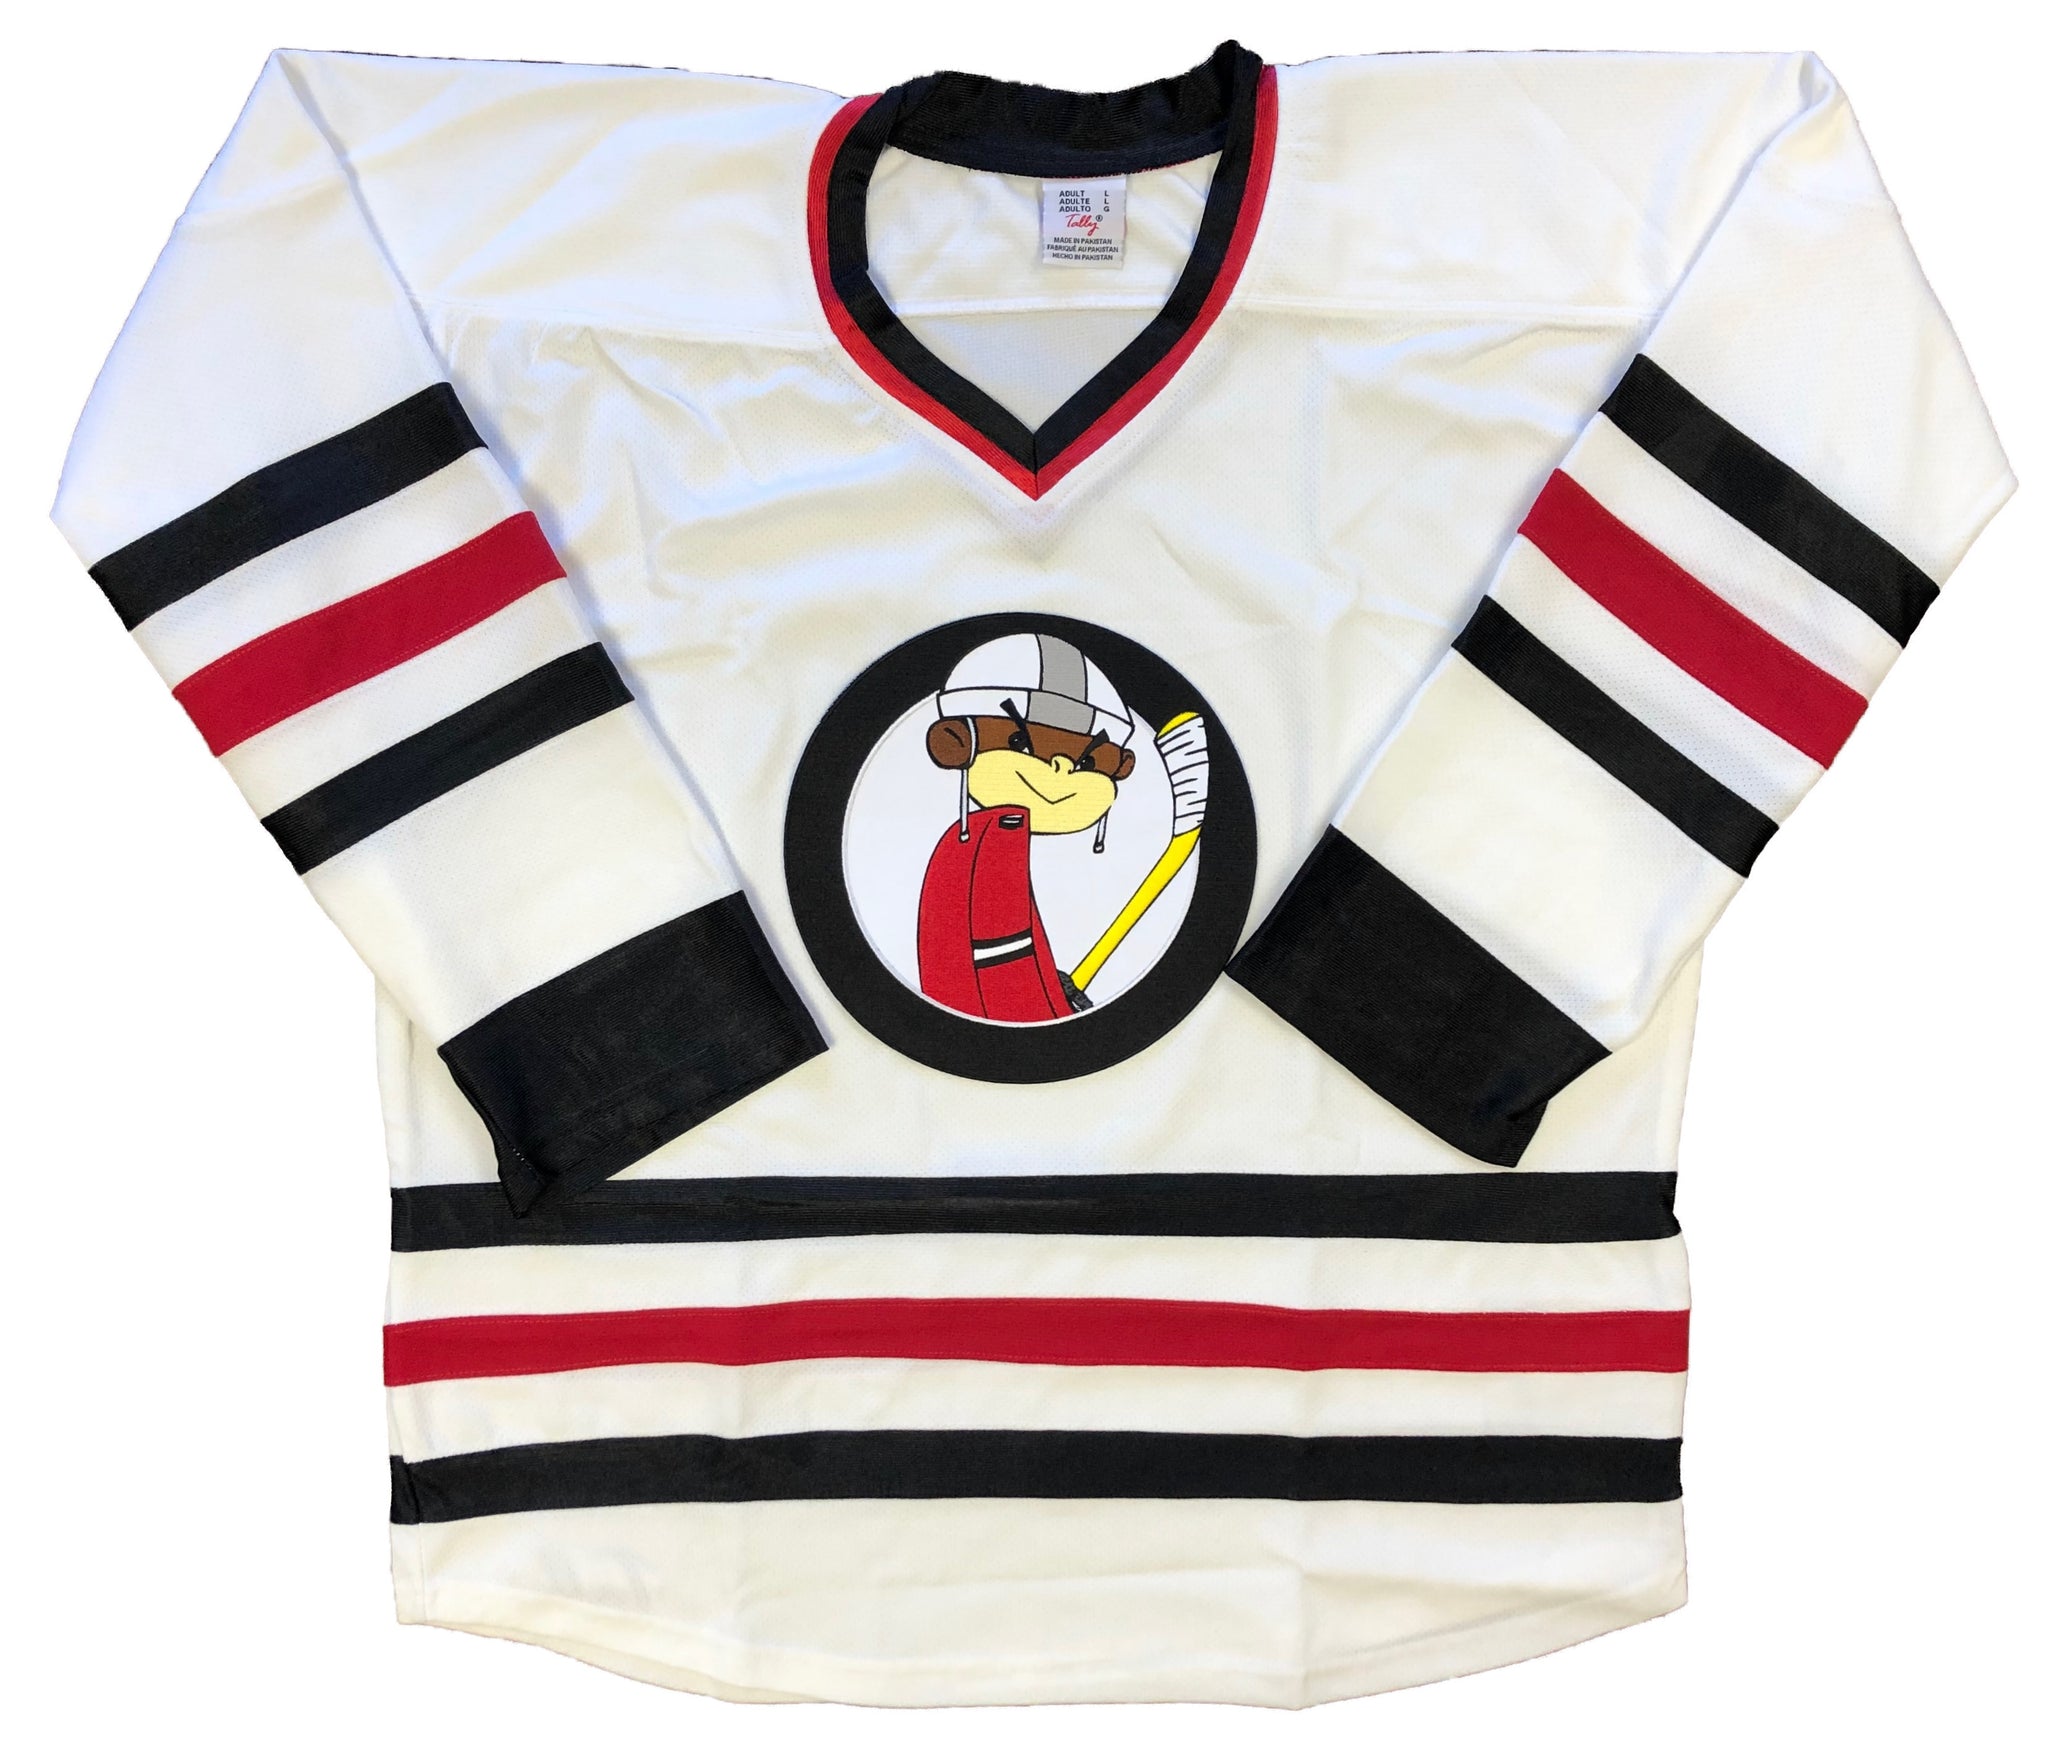 Customized Vintage Ducks Ice Hockey Jersey Adult and Youth 